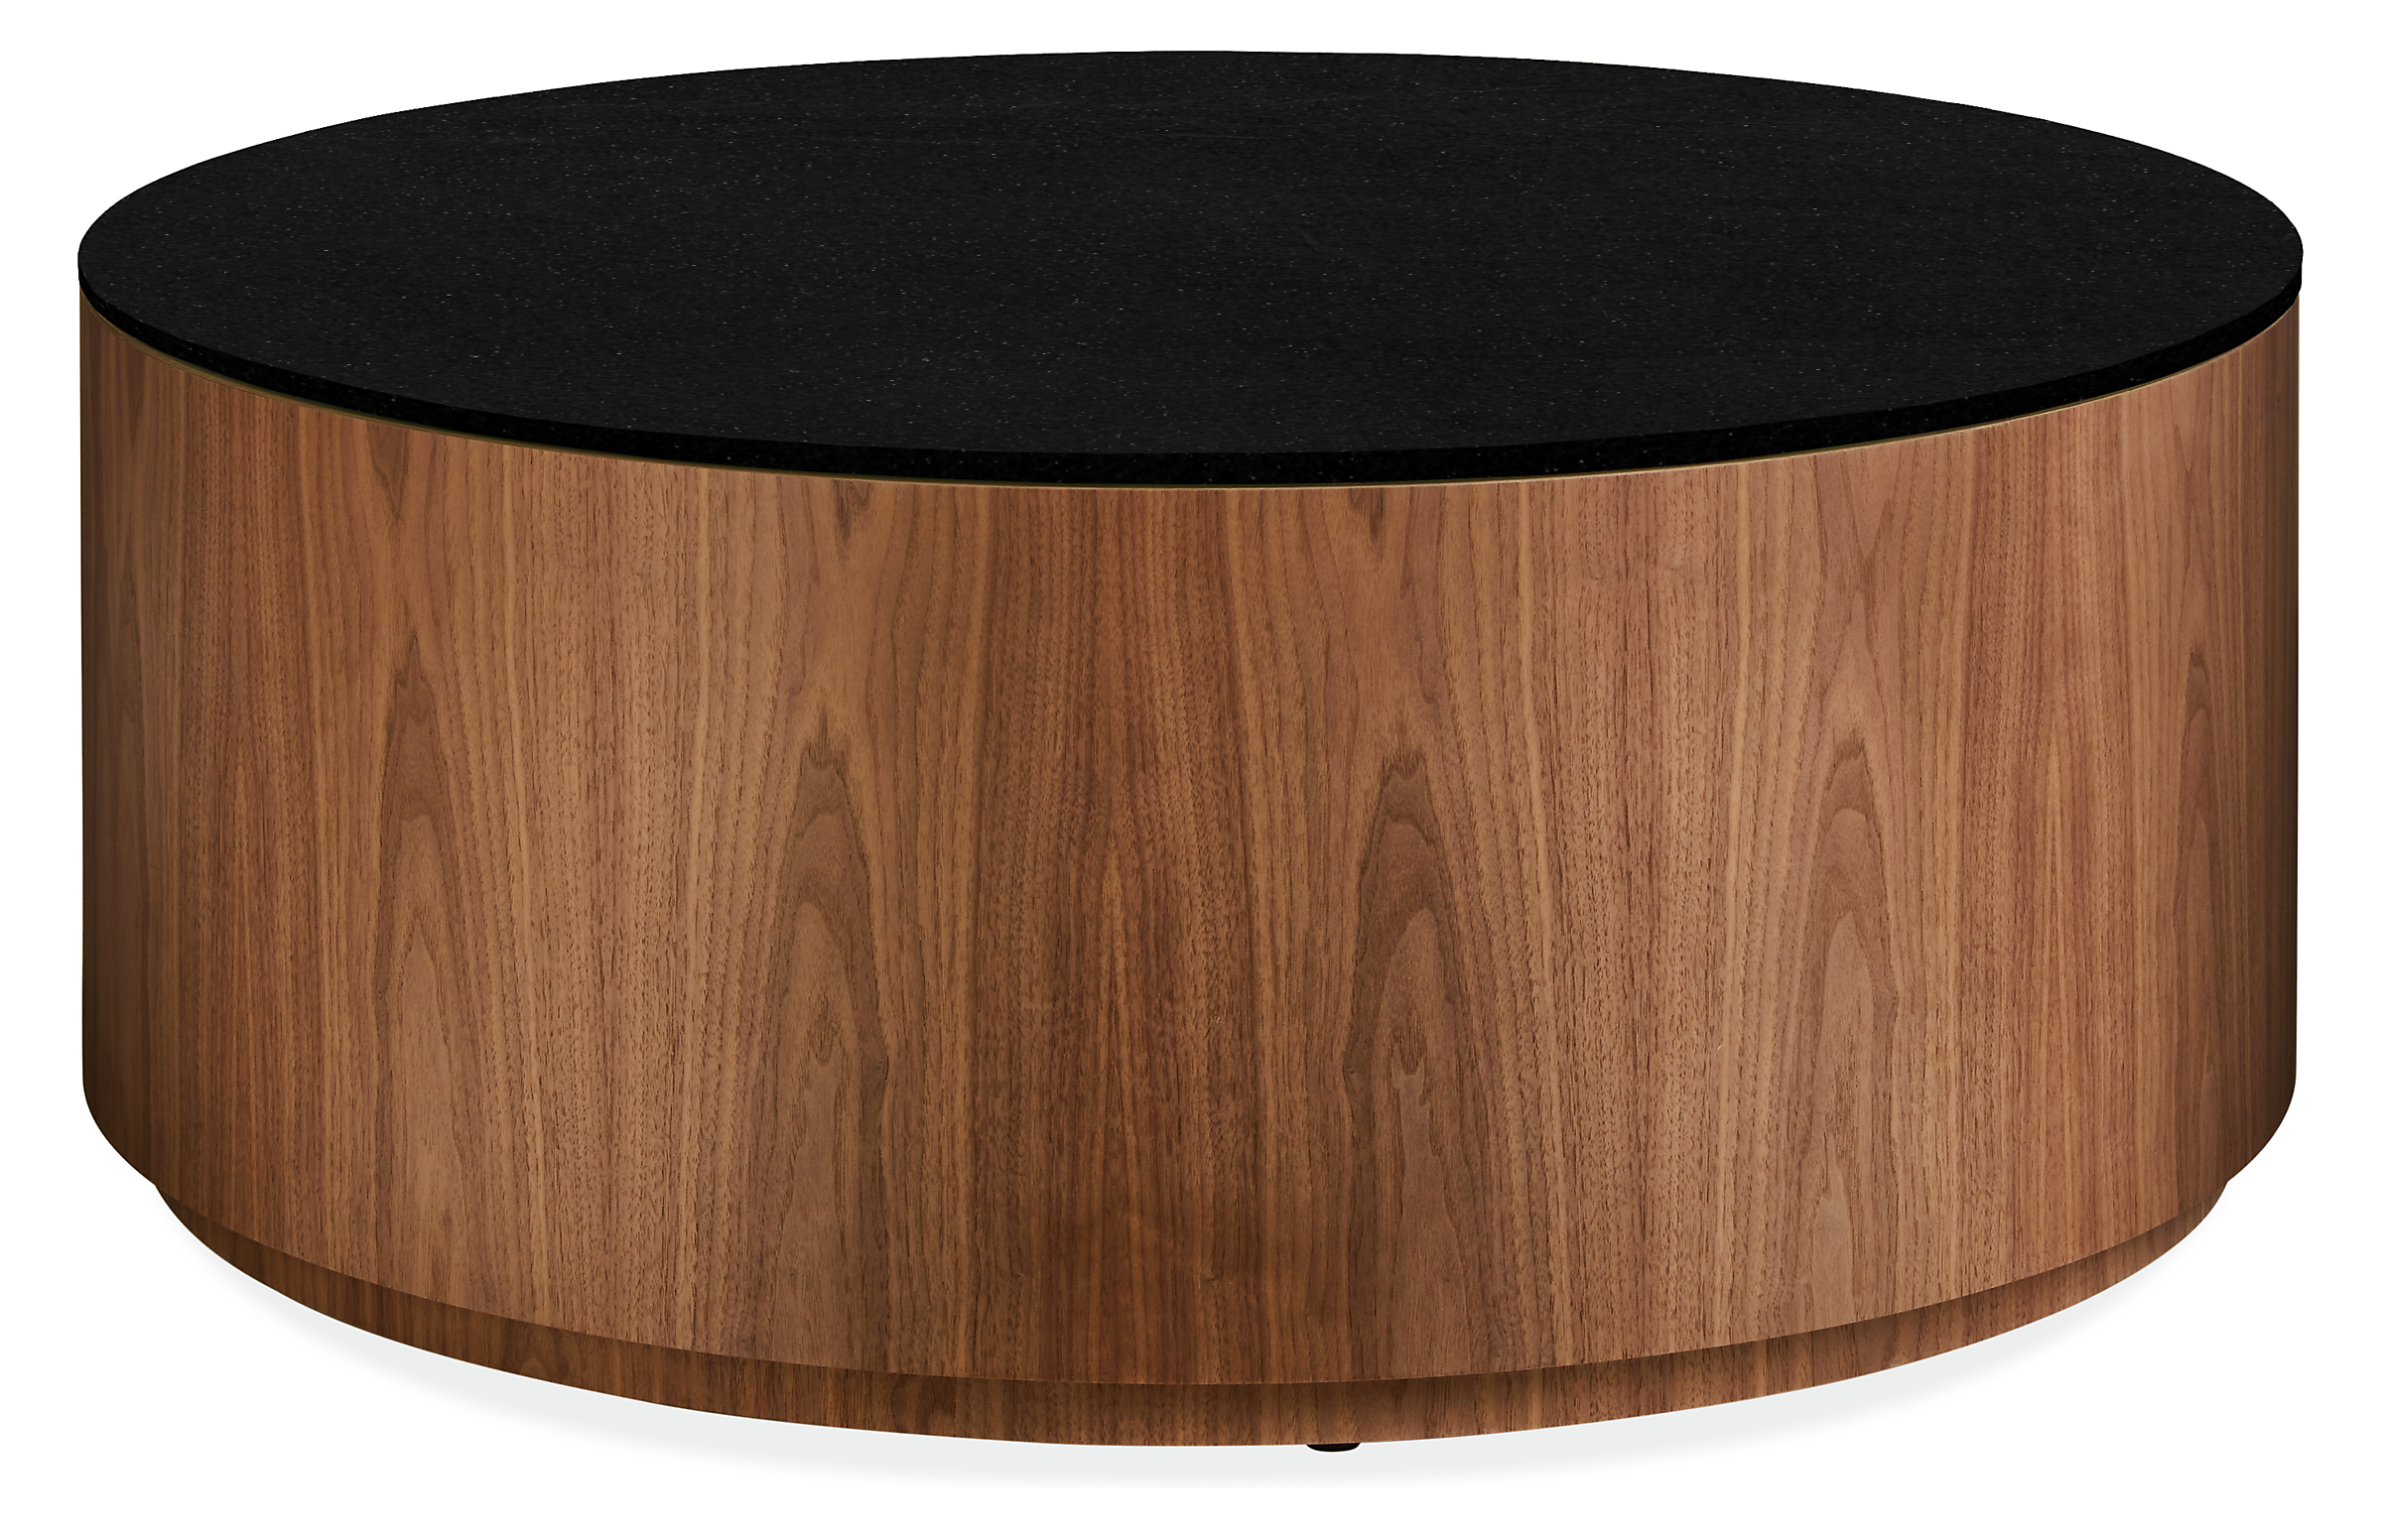 Liam 36 diam 15h Round Coffee Table with Top Option